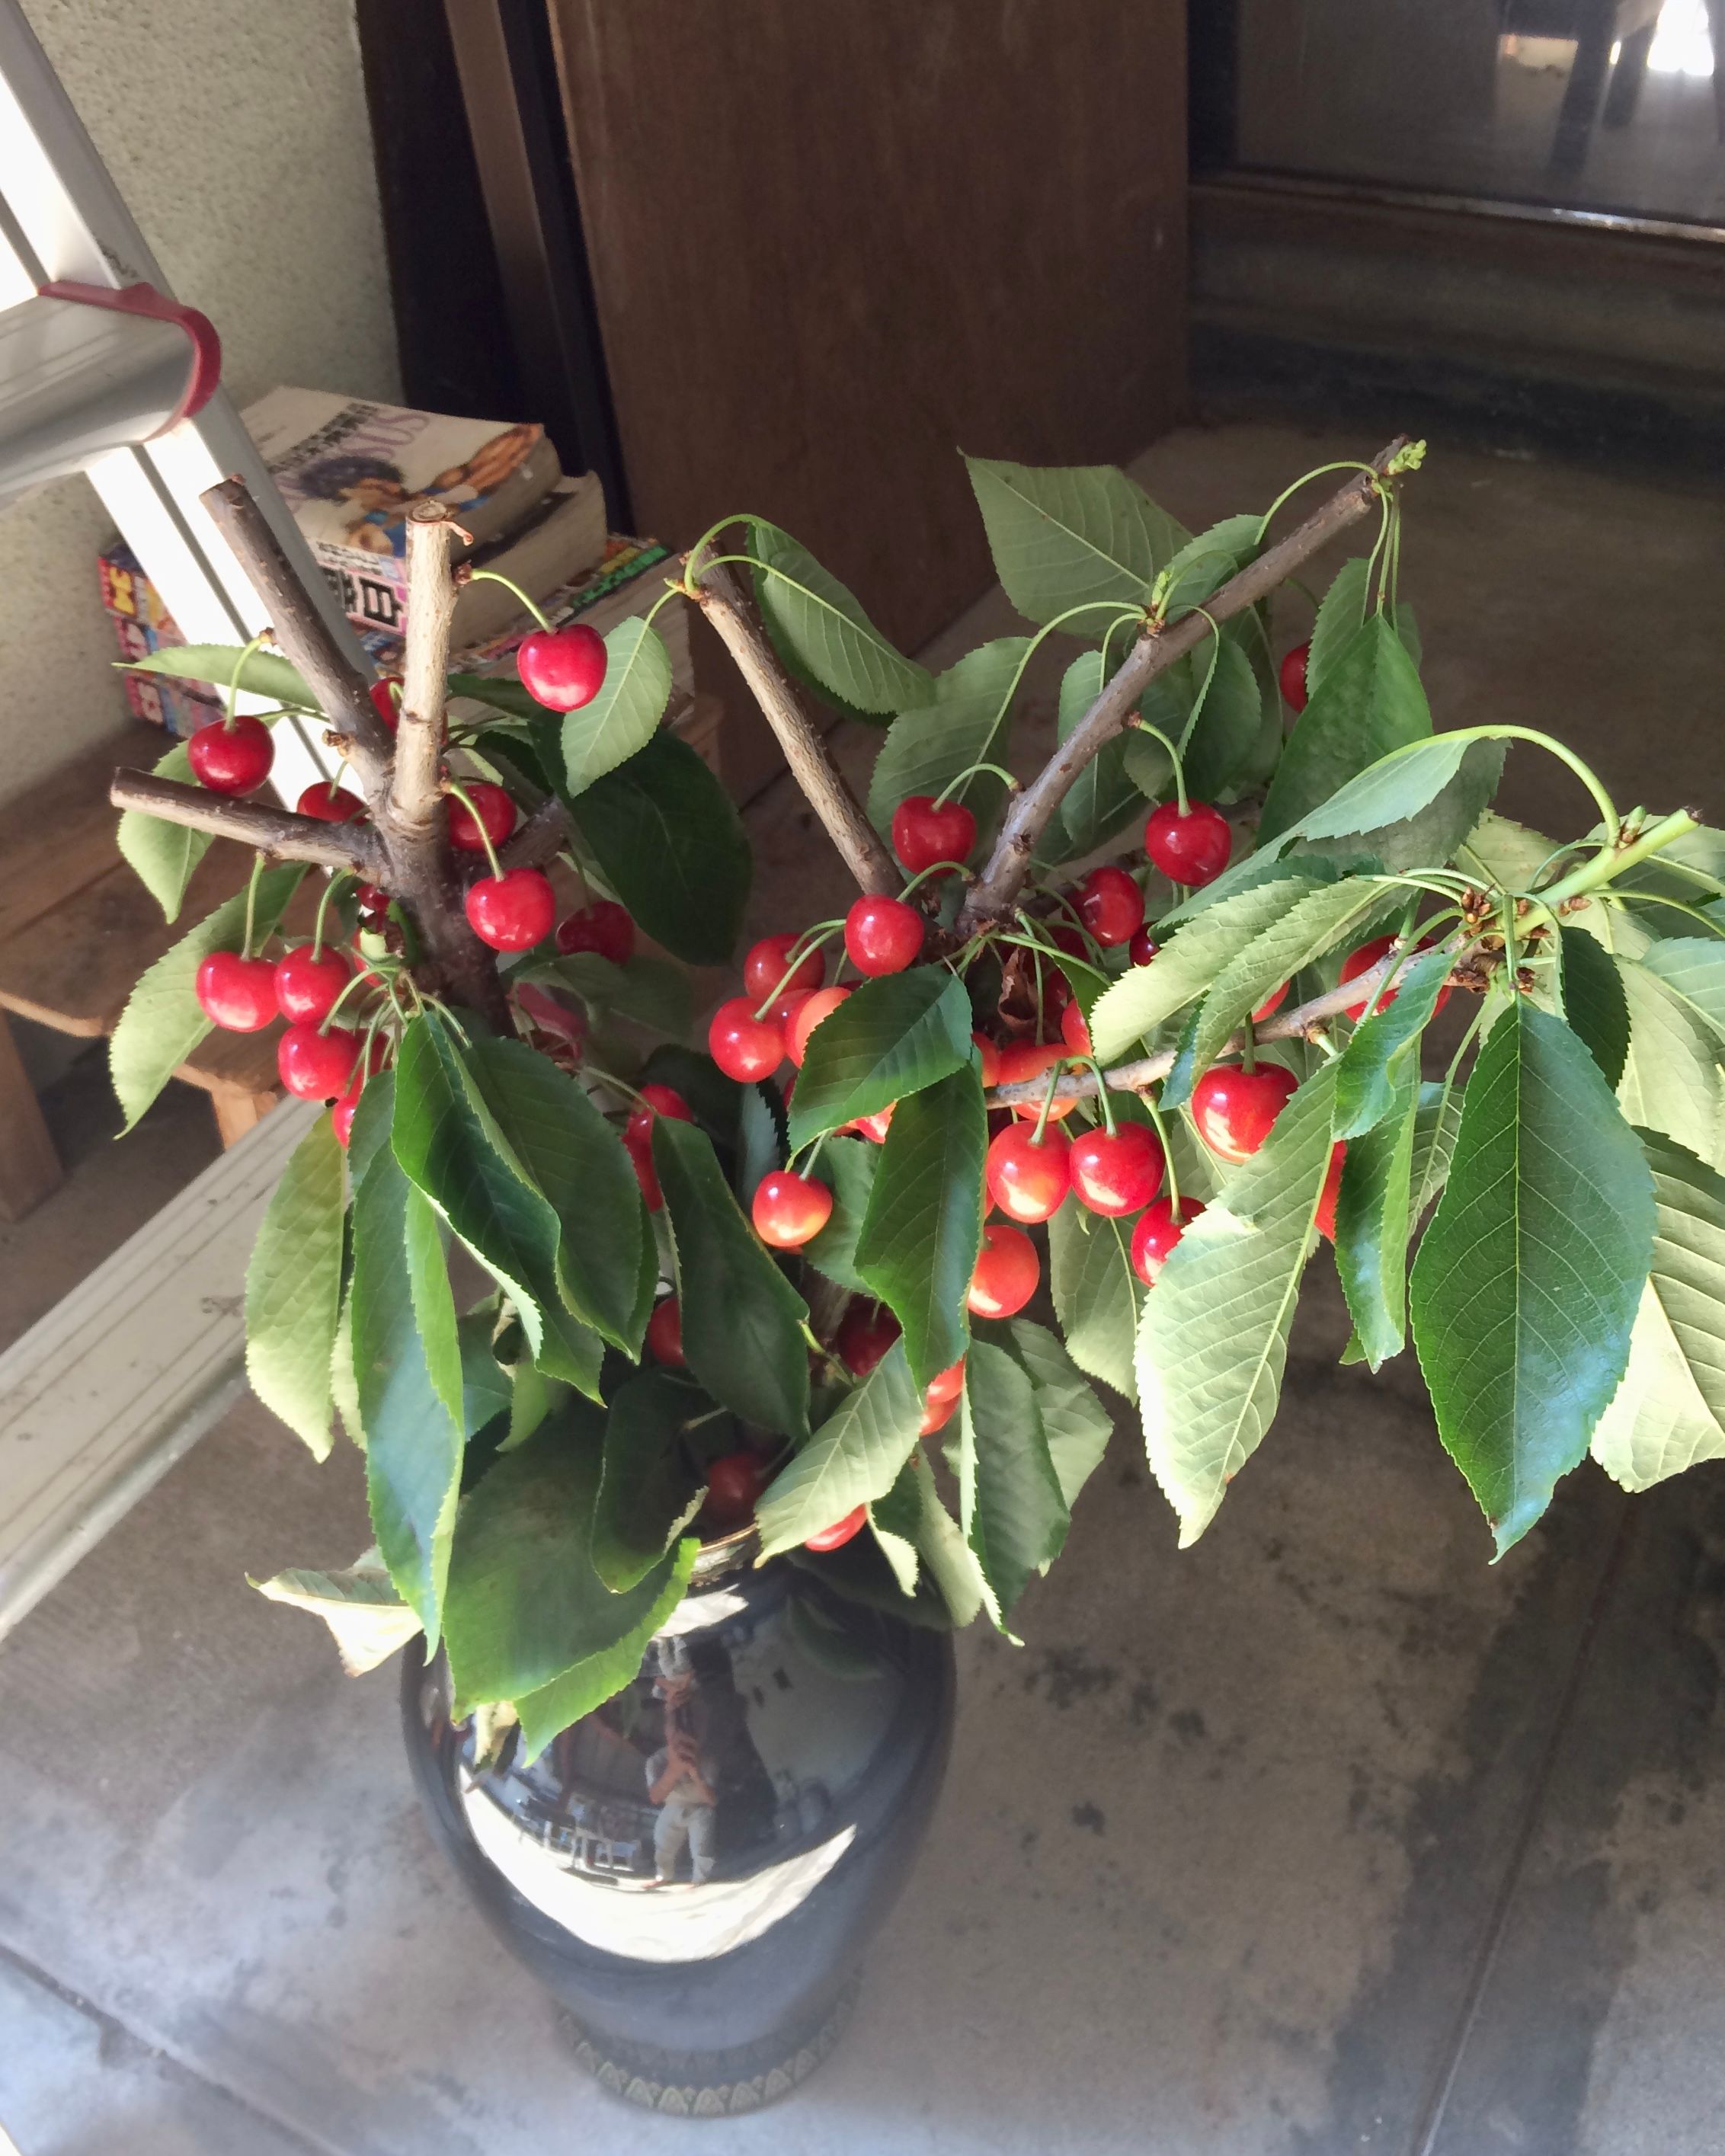 Cherry branches with fruit and leaves in a vase.